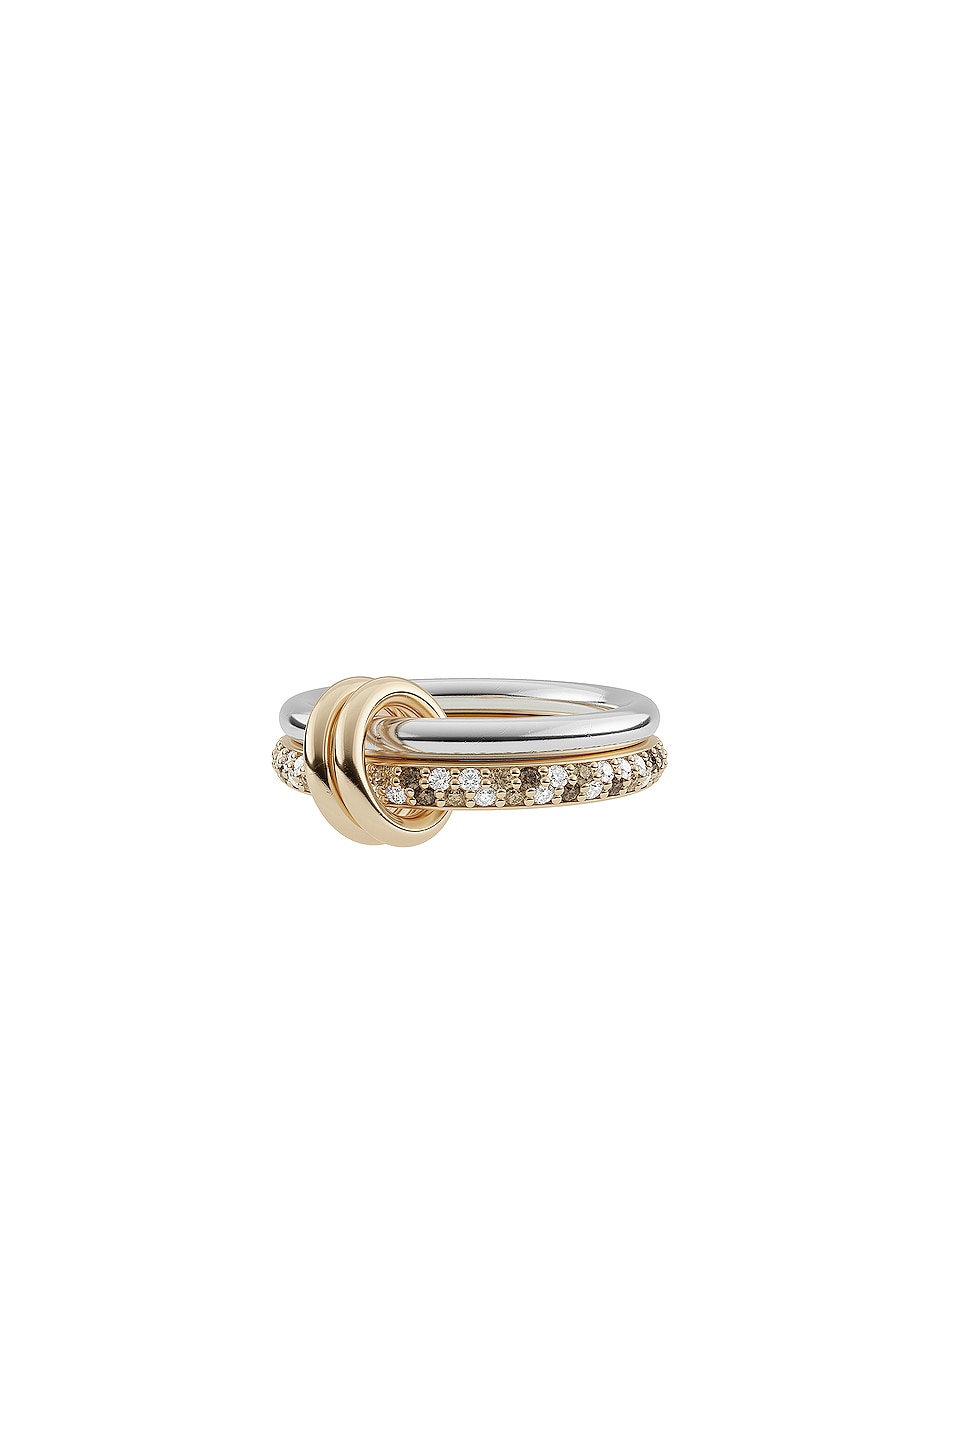 Image 1 of Spinelli Kilcollin Virgo Petite Ring in Silver, Yellow Gold, Cognac, & Champagne